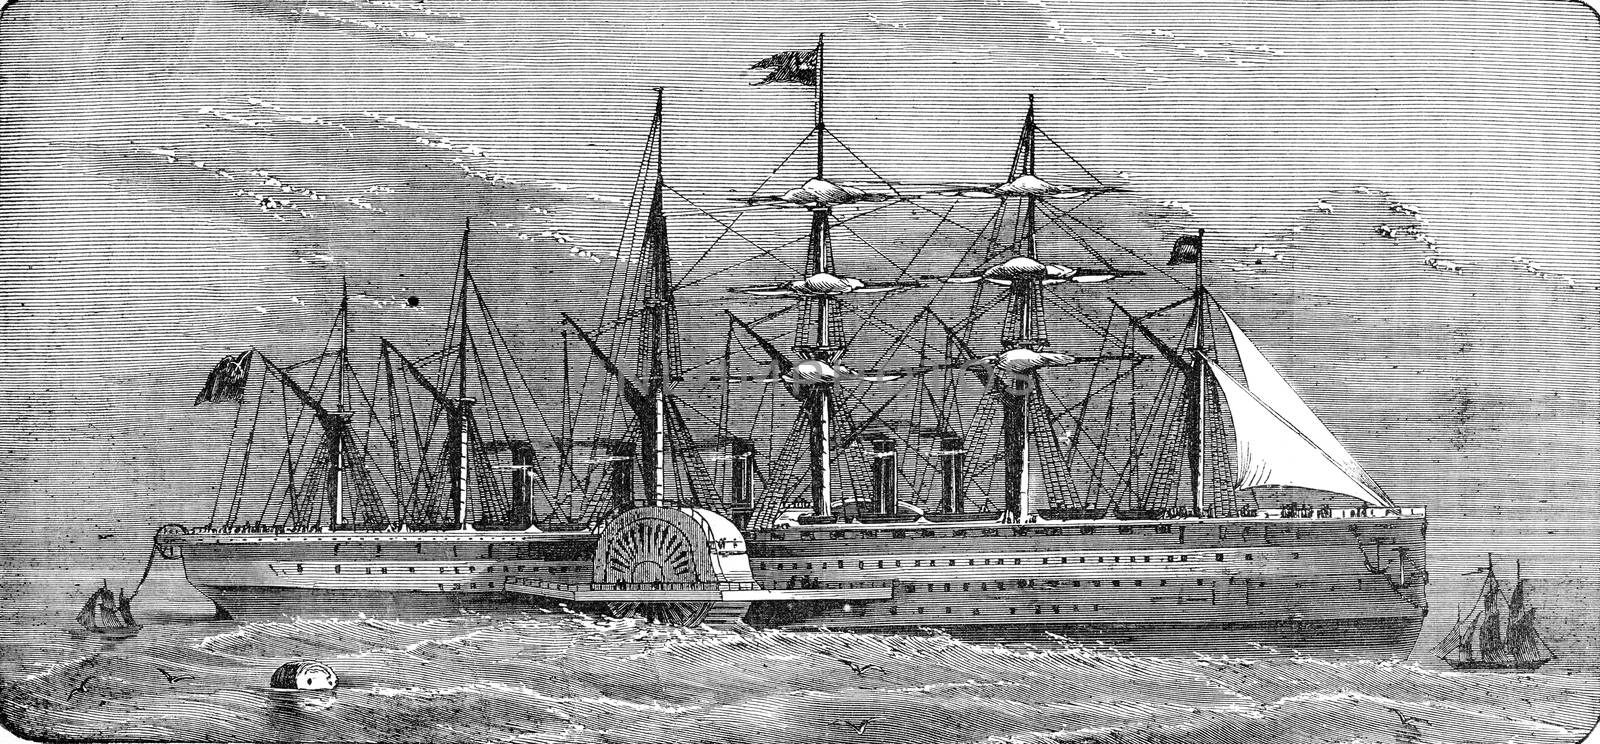 The Great-Eastern reeling off the telegraph cable, vintage engraved illustration. Industrial encyclopedia E.-O. Lami - 1875.
